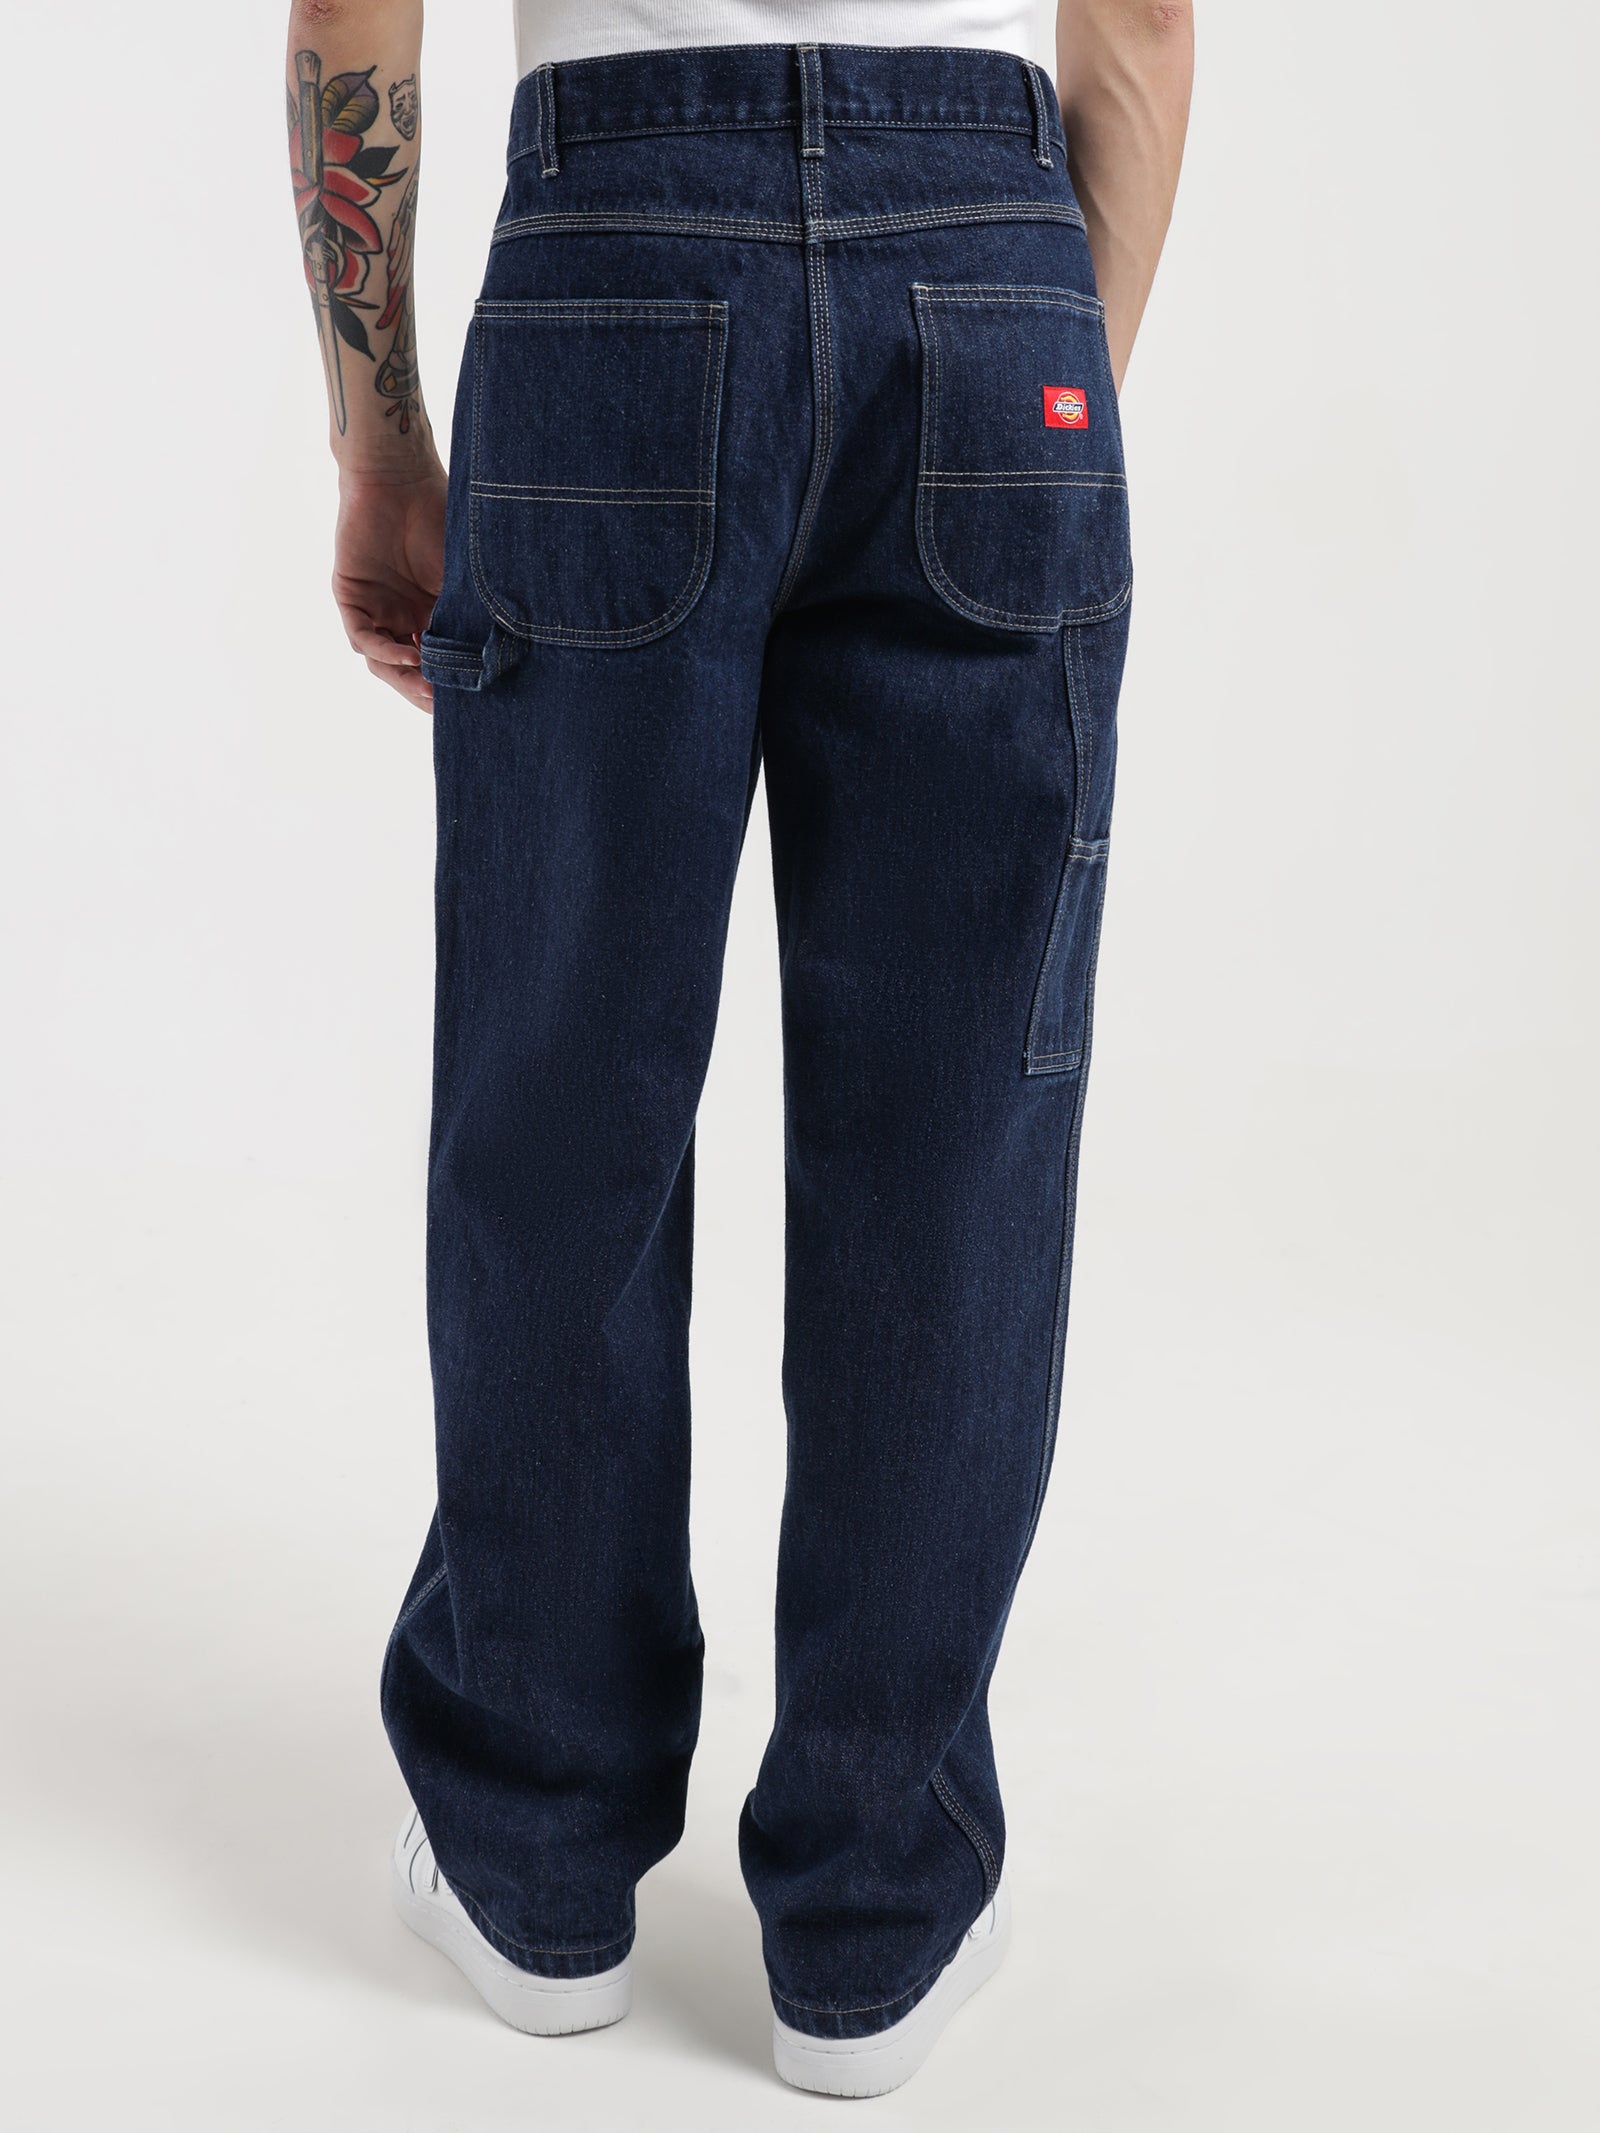 Relaxed Fit Carpenter Jeans in Rinsed Indigo